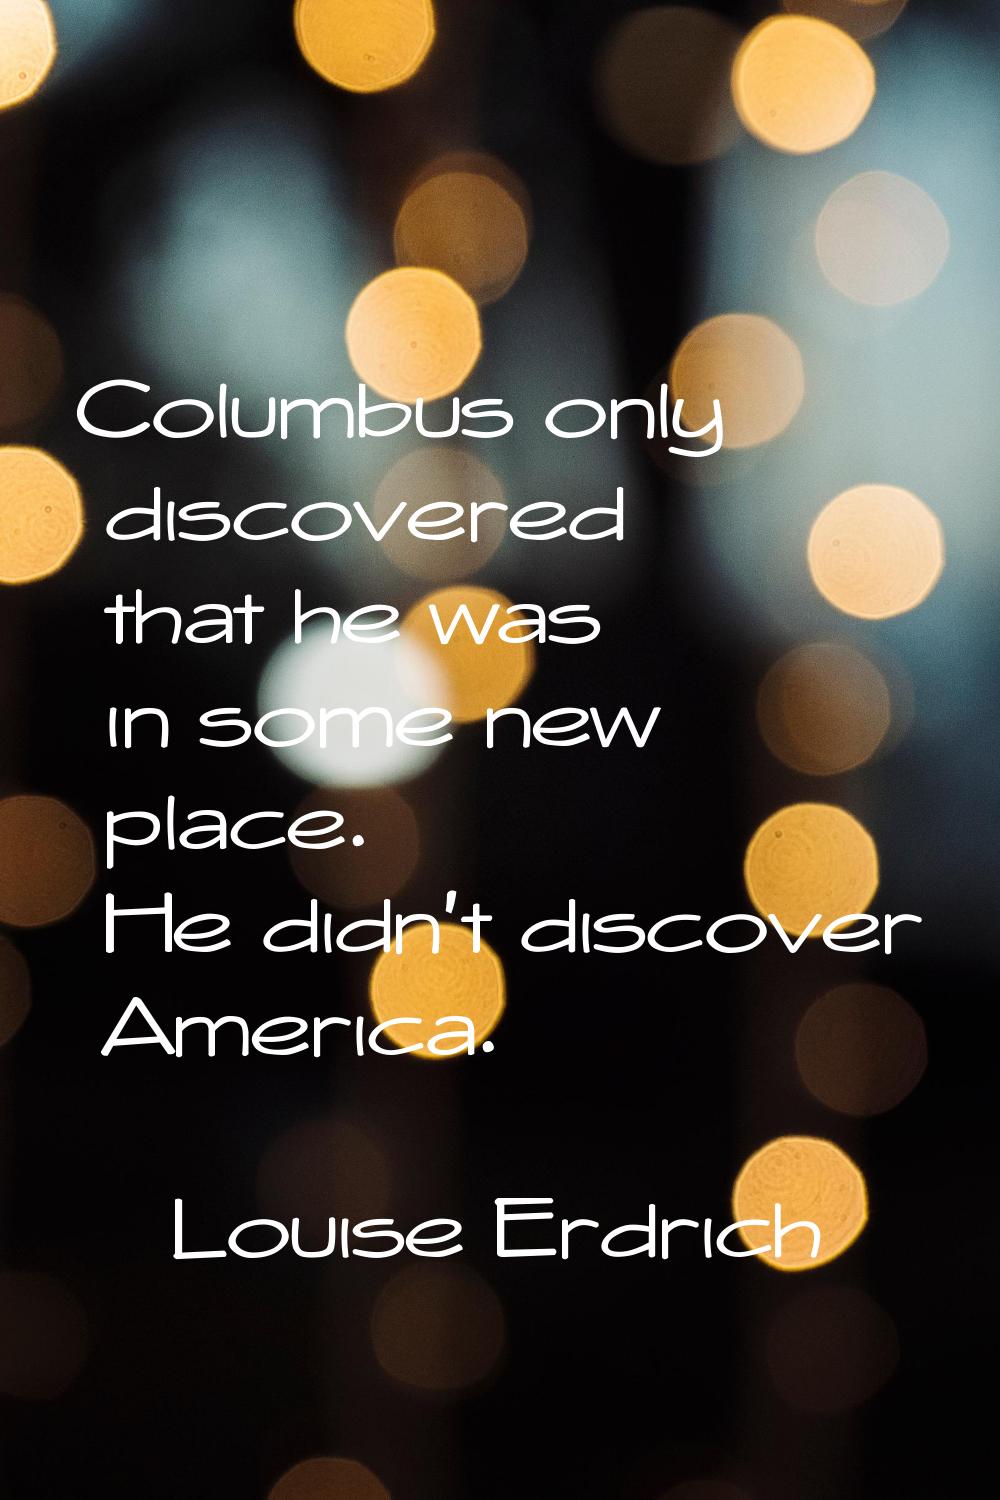 Columbus only discovered that he was in some new place. He didn't discover America.